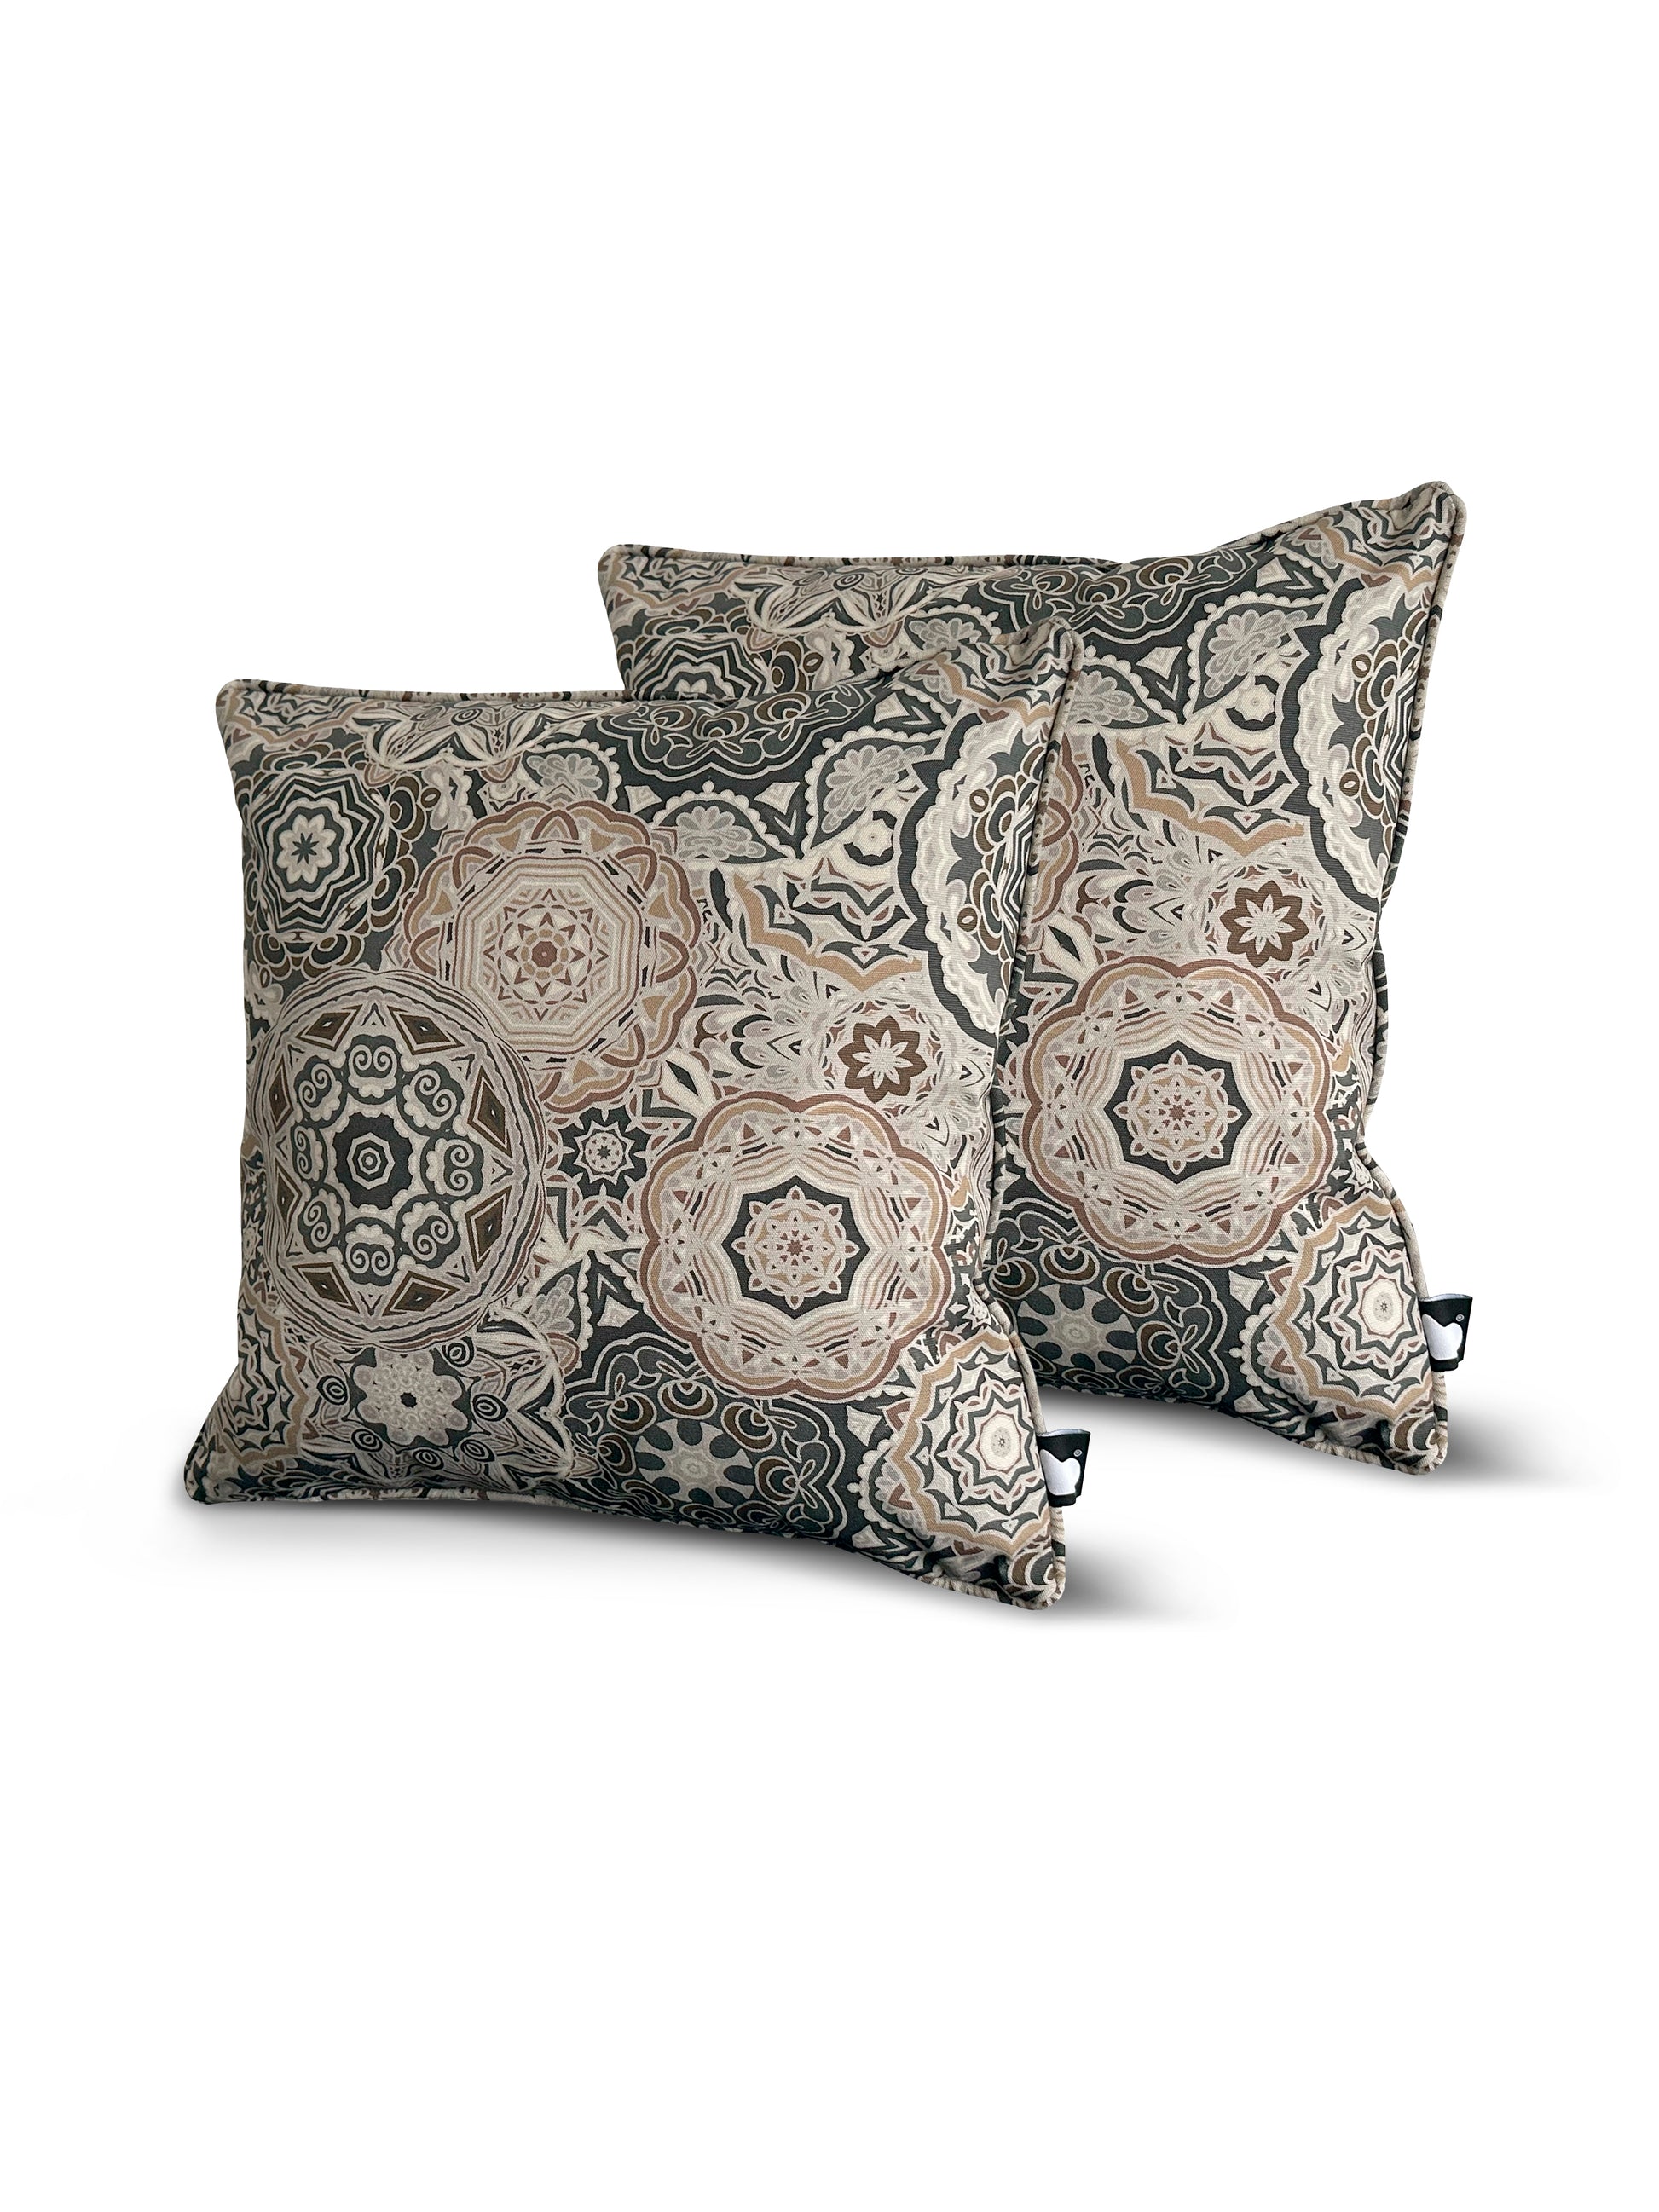 Two decorative Brisks B Cushion Twin Pack Art Collection with intricate geometric and floral patterns in shades of beige, cream, and dark blue. The design features motifs reminiscent of mandalas and traditional tile work. These UV-resistant pillows are placed at a slight angle, leaning against each other.